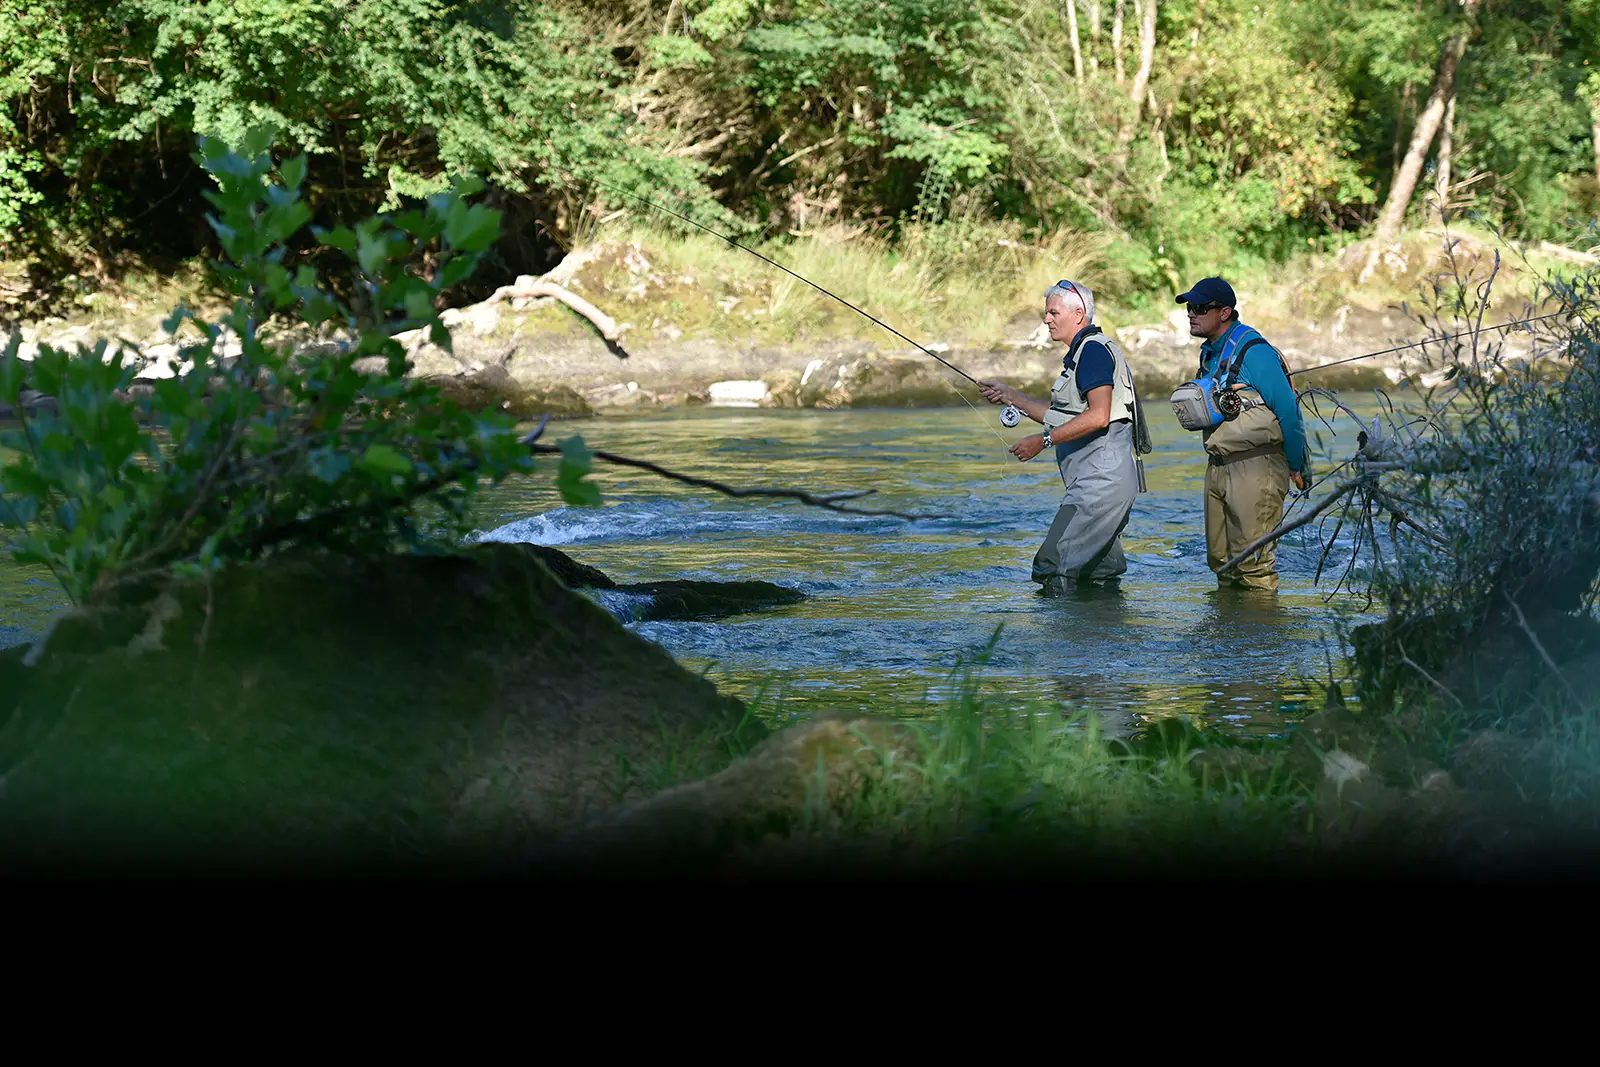 A fly fishing guide standing behind and angler in a river teaching him how to fly fish.